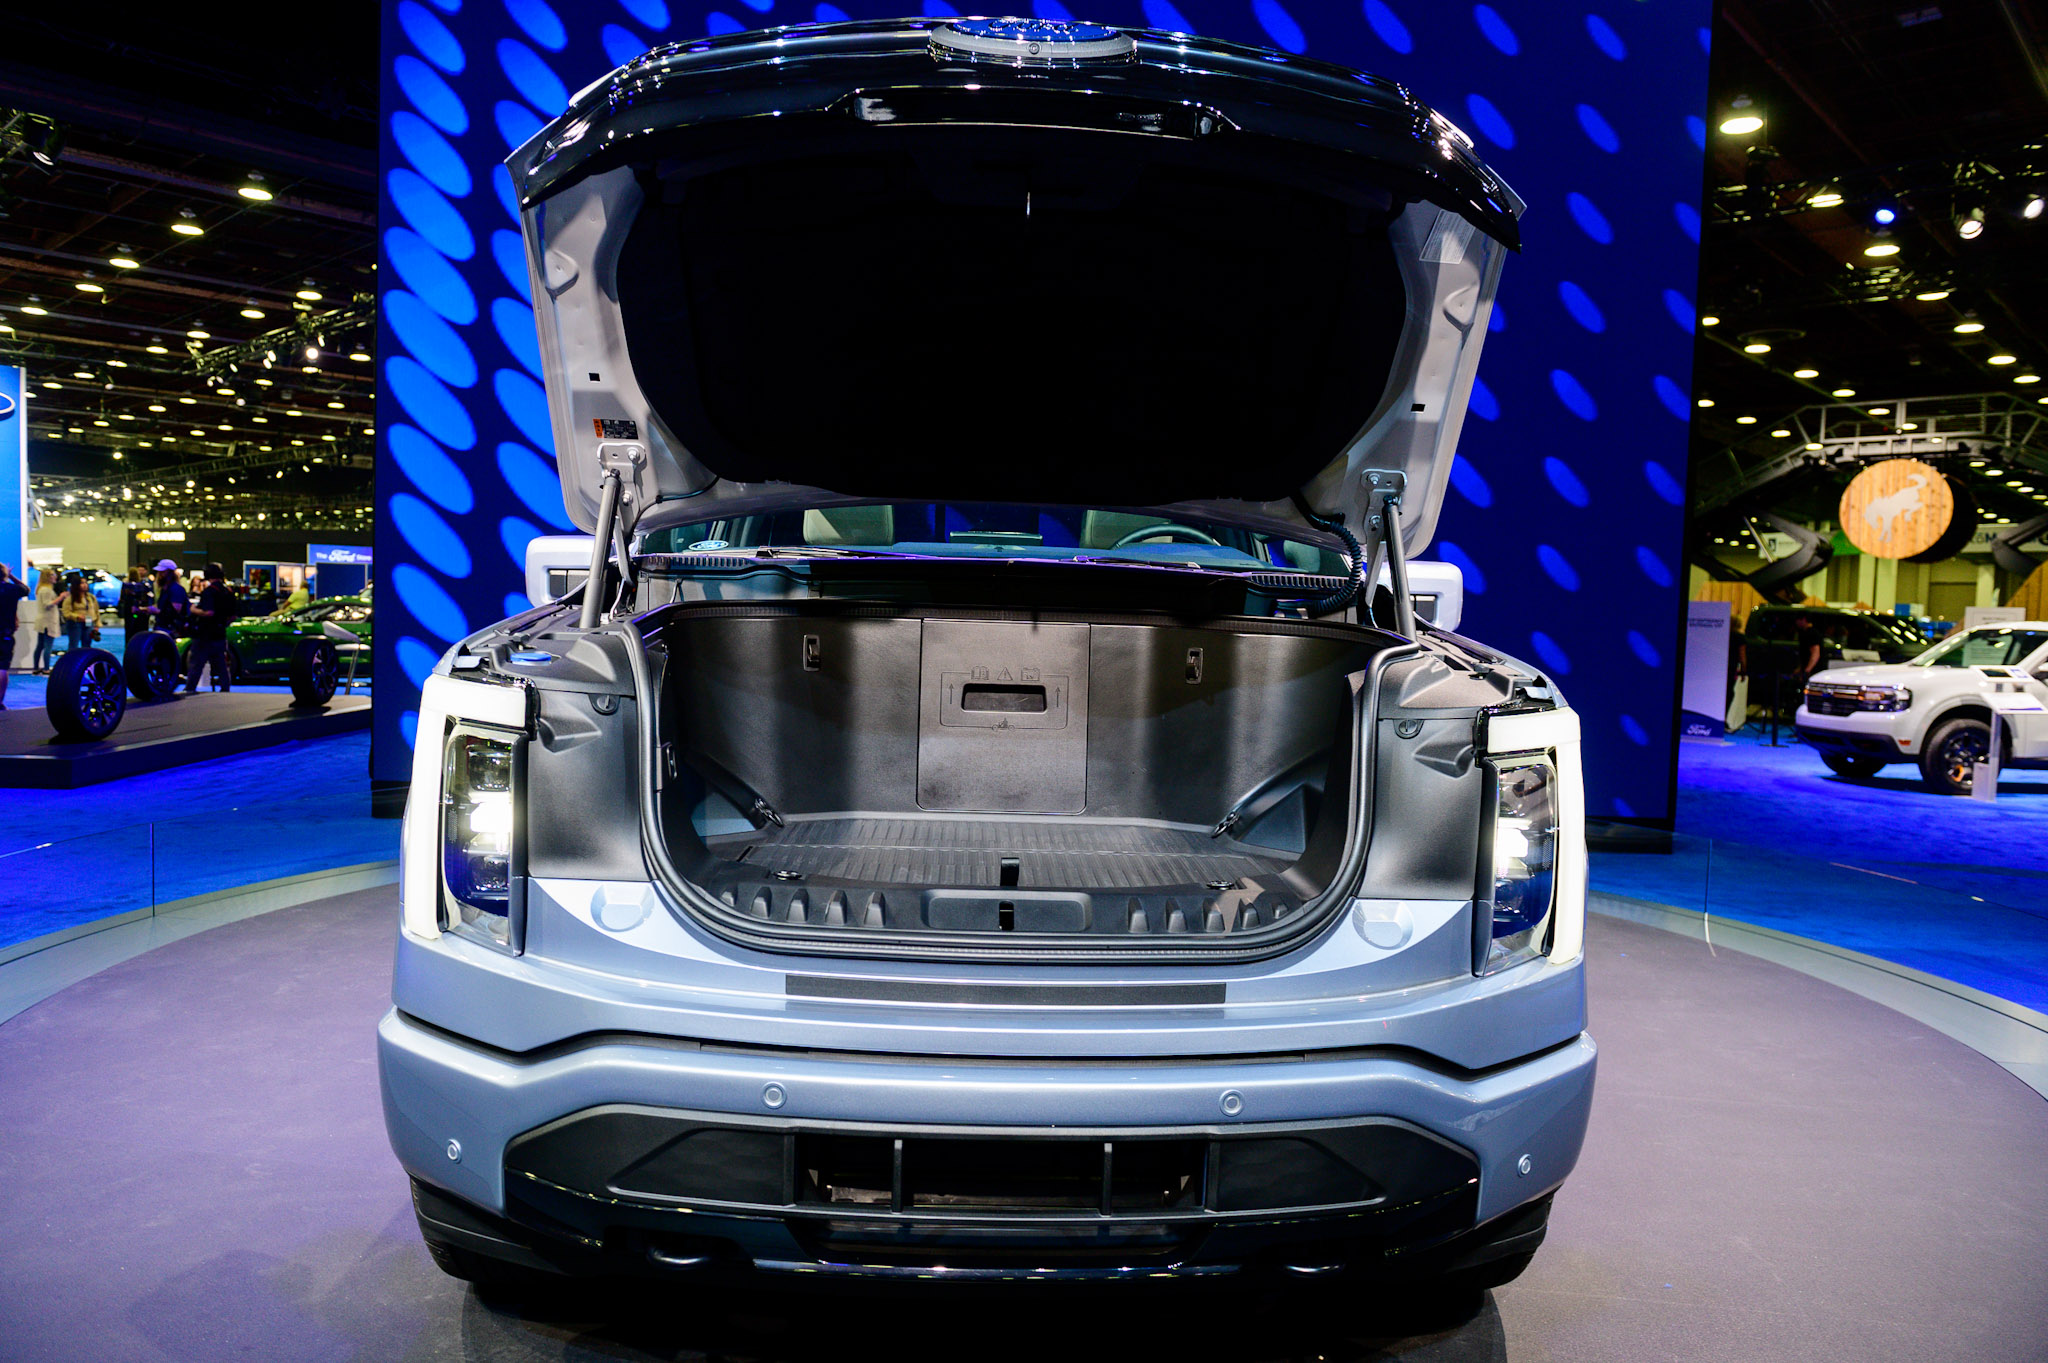 The frunk of a Ford F-150 Lightning as tghe 2022 North American International Auto Show begins with media preview day at Huntington Place in Detroit on Wednesday, Sept. 14 2022.